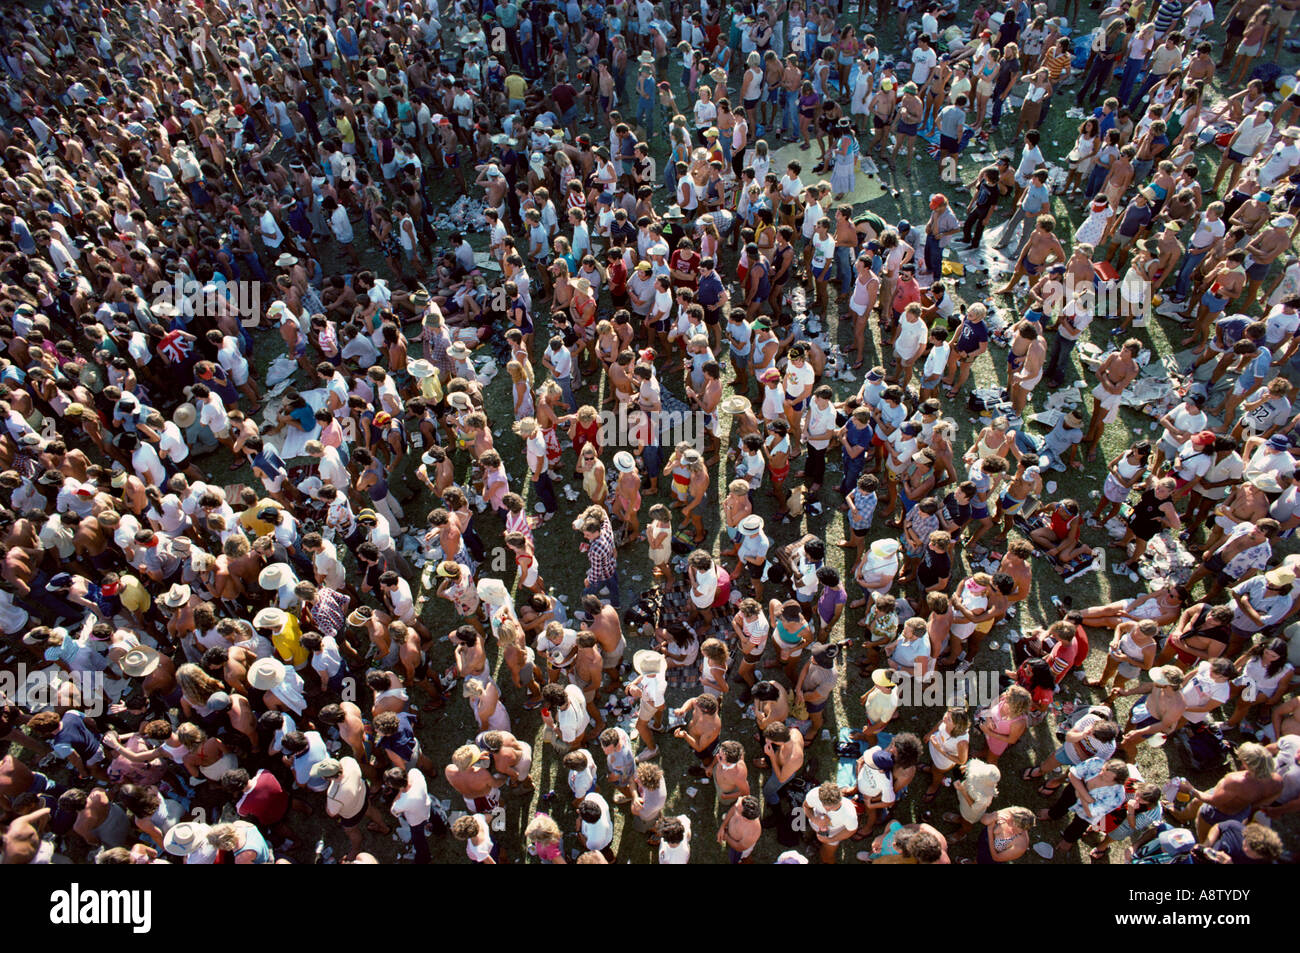 Overhead view of crowds at outdoor rock music concert. Stock Photo